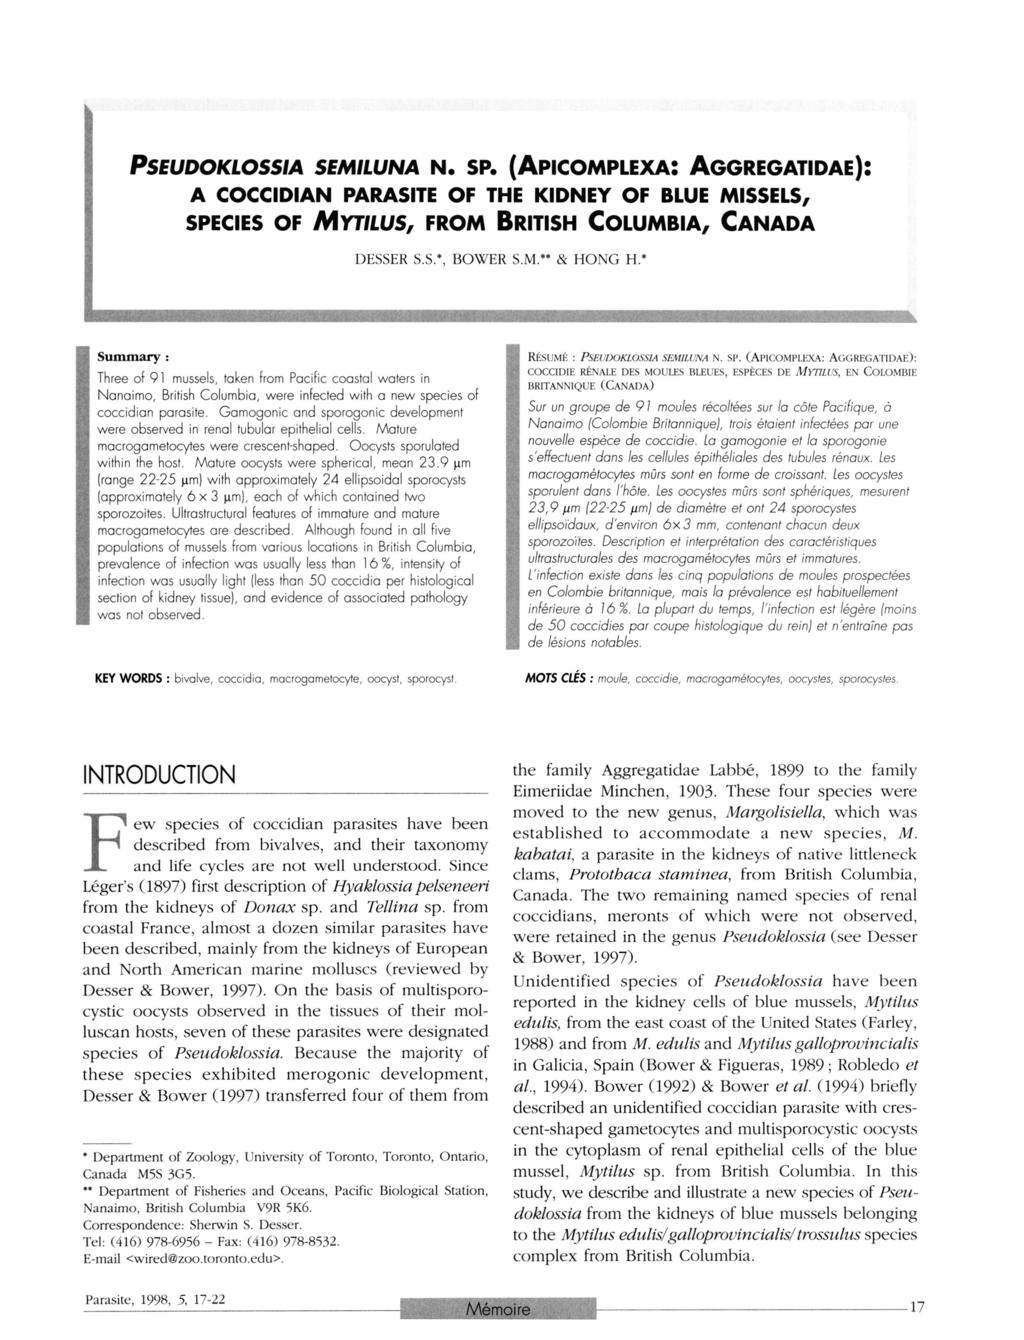 Article available at http://www.parasite-journal.org or http://dx.doi.org/10.1051/parasite/1998051017 PSEUDOKLOSSIA SEMILUNA N. SP.